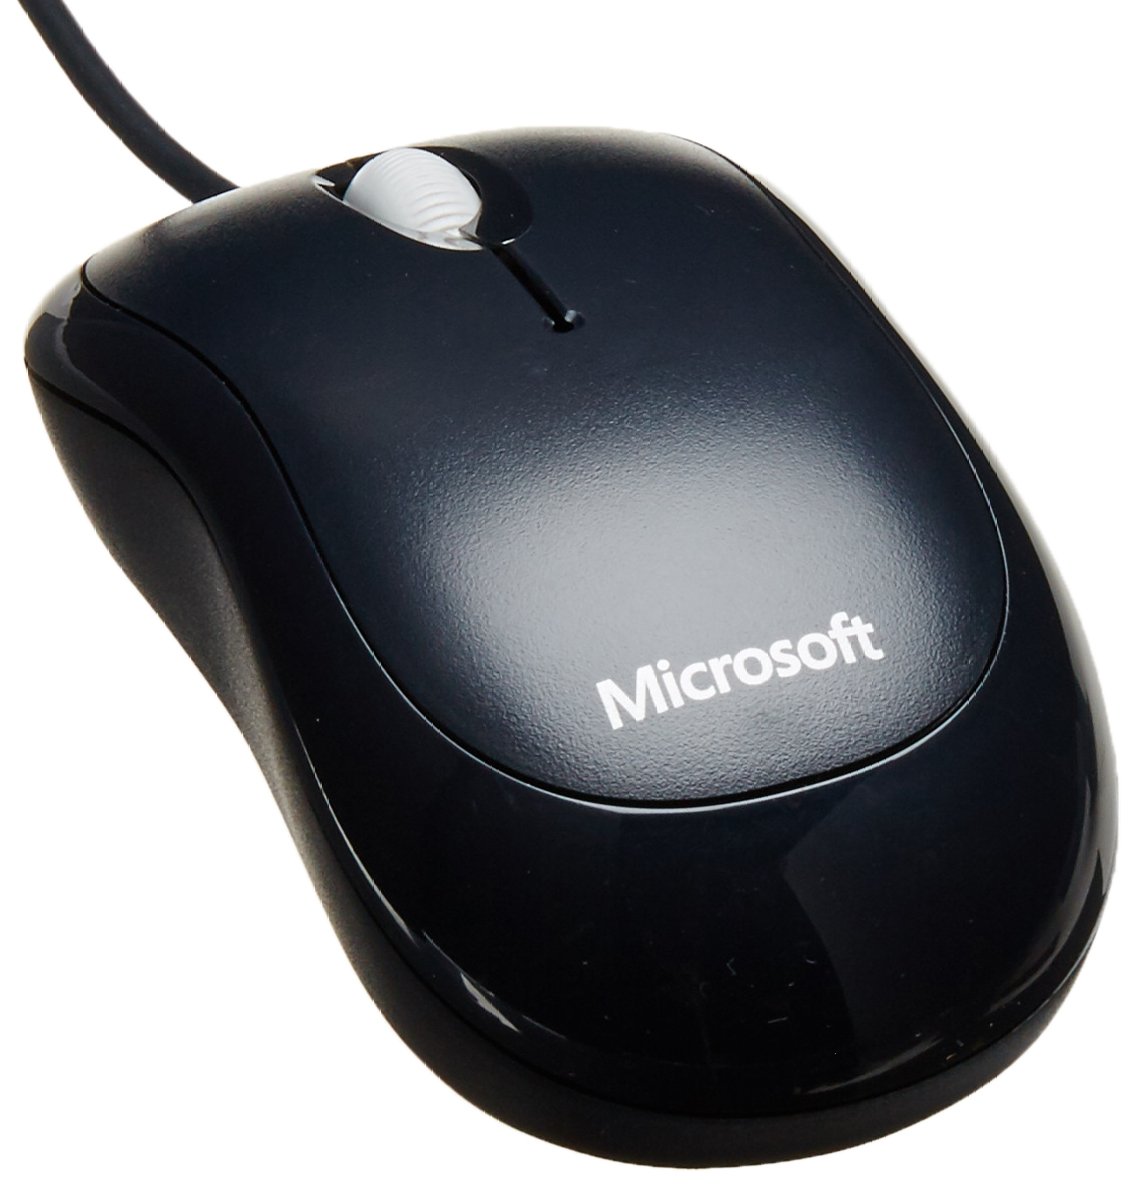 Microsoft Wired Desktop 600 (Black) - Wired Keyboard and Mouse Combo. USB Connectivity. Spill Resistant Design. Plug and Play